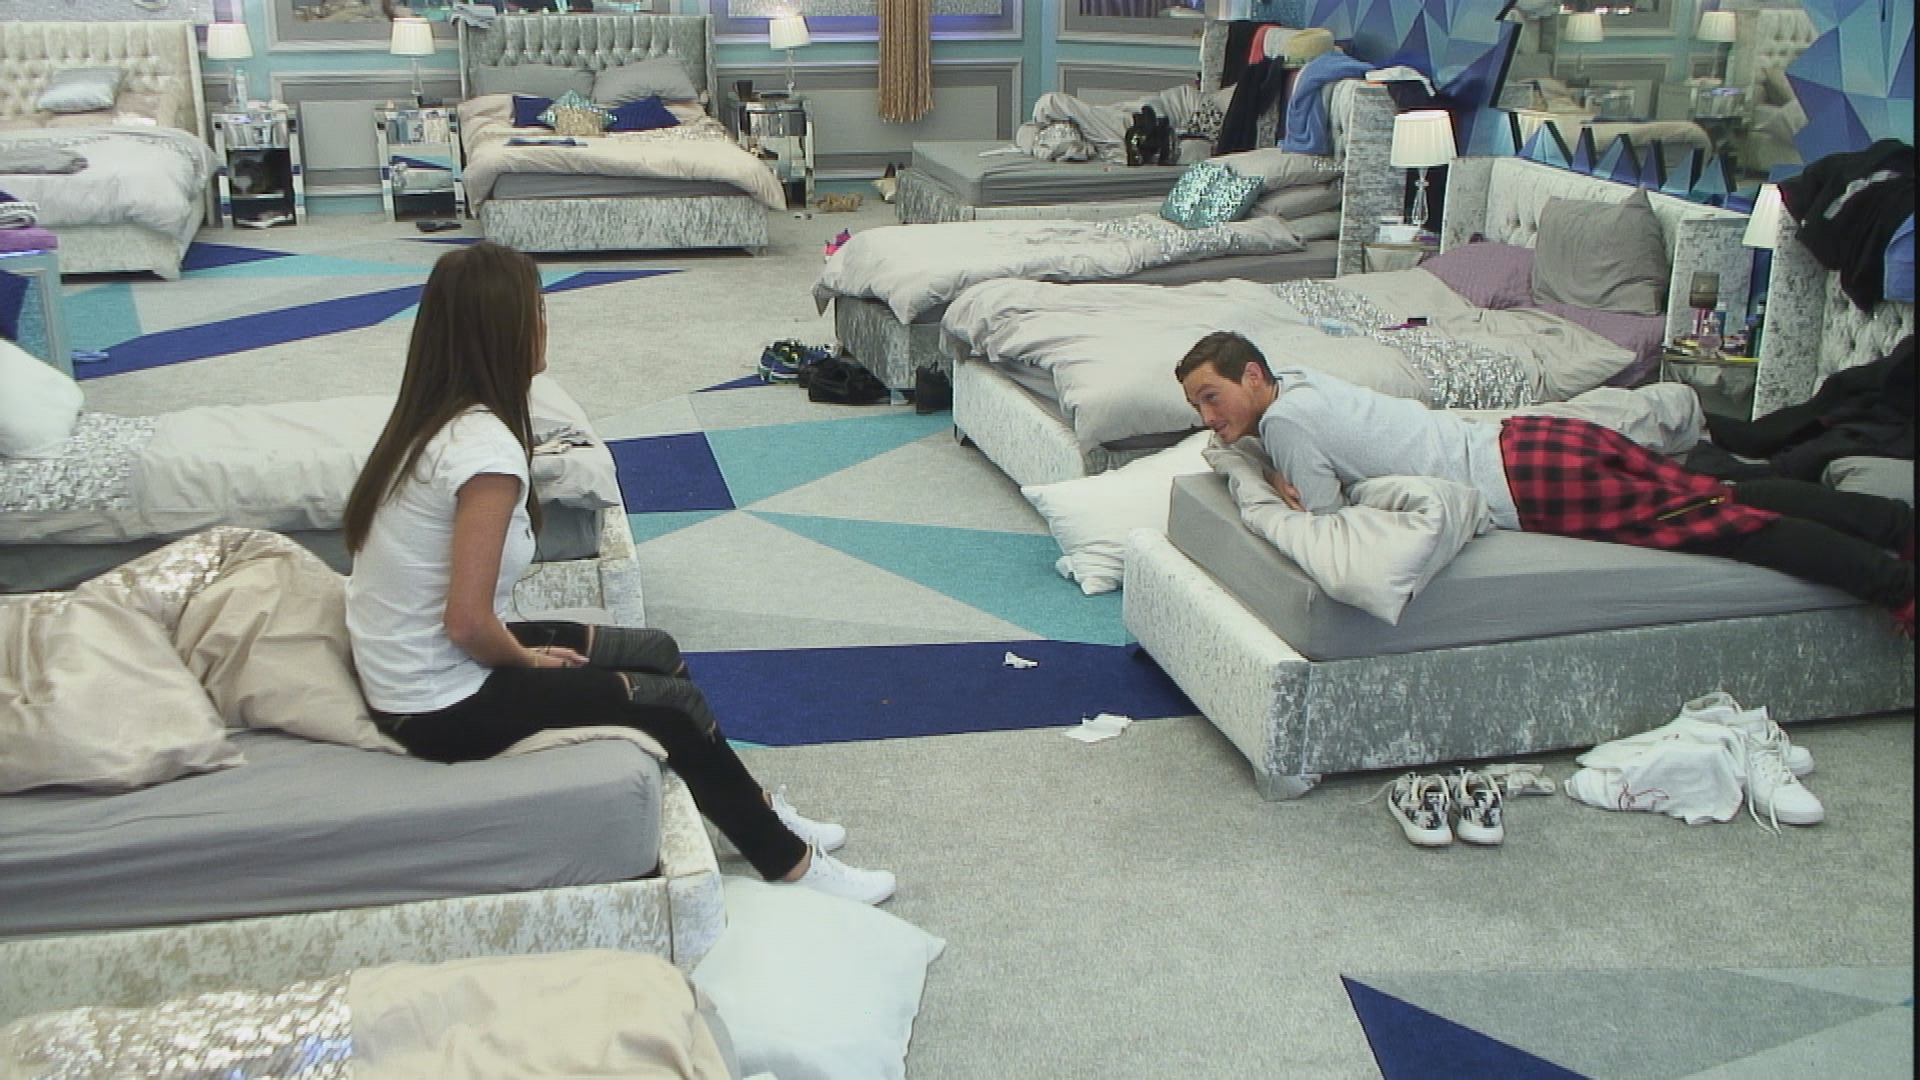 Day 41: Helen and Danny discuss Marc’s nominations